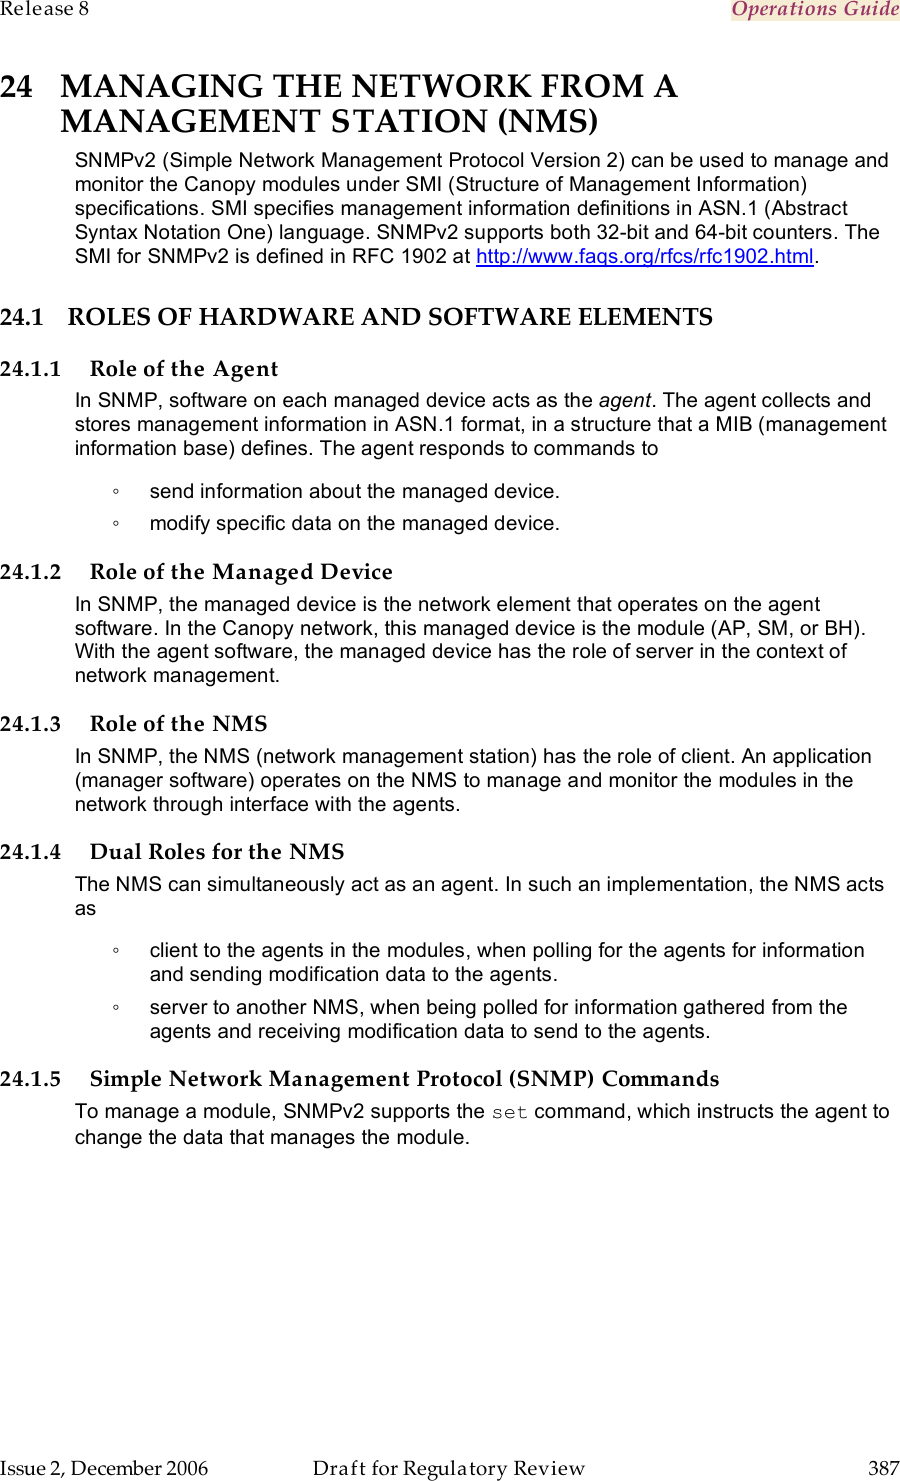 Release 8    Operations Guide   Issue 2, December 2006  Draft for Regulatory Review  387     24 MANAGING THE NETWORK FROM A MANAGEMENT STATION (NMS) SNMPv2 (Simple Network Management Protocol Version 2) can be used to manage and monitor the Canopy modules under SMI (Structure of Management Information) specifications. SMI specifies management information definitions in ASN.1 (Abstract Syntax Notation One) language. SNMPv2 supports both 32-bit and 64-bit counters. The SMI for SNMPv2 is defined in RFC 1902 at http://www.faqs.org/rfcs/rfc1902.html. 24.1 ROLES OF HARDWARE AND SOFTWARE ELEMENTS 24.1.1 Role of the Agent In SNMP, software on each managed device acts as the agent. The agent collects and stores management information in ASN.1 format, in a structure that a MIB (management information base) defines. The agent responds to commands to  ◦  send information about the managed device. ◦  modify specific data on the managed device. 24.1.2 Role of the Managed Device In SNMP, the managed device is the network element that operates on the agent software. In the Canopy network, this managed device is the module (AP, SM, or BH). With the agent software, the managed device has the role of server in the context of network management.  24.1.3 Role of the NMS In SNMP, the NMS (network management station) has the role of client. An application (manager software) operates on the NMS to manage and monitor the modules in the network through interface with the agents. 24.1.4 Dual Roles for the NMS The NMS can simultaneously act as an agent. In such an implementation, the NMS acts as  ◦  client to the agents in the modules, when polling for the agents for information and sending modification data to the agents.  ◦  server to another NMS, when being polled for information gathered from the agents and receiving modification data to send to the agents.  24.1.5 Simple Network Management Protocol (SNMP) Commands To manage a module, SNMPv2 supports the set command, which instructs the agent to change the data that manages the module. 